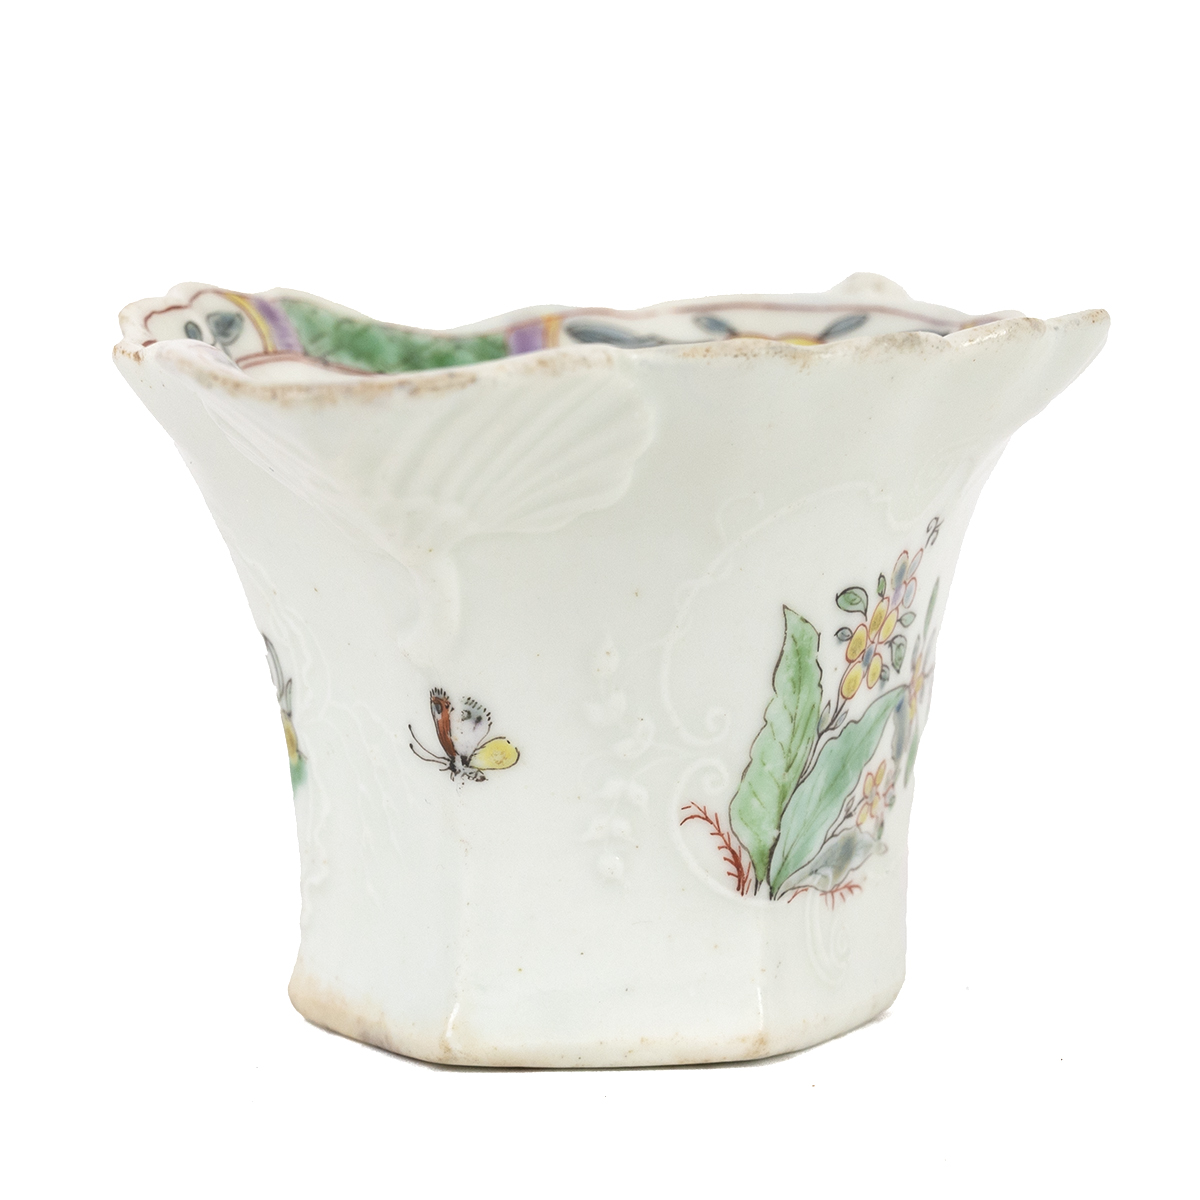 Worcester - First or Dr Wall Period hexagonal "Wigornia" form cream jug, circa 1760, with hand pa... - Image 3 of 4